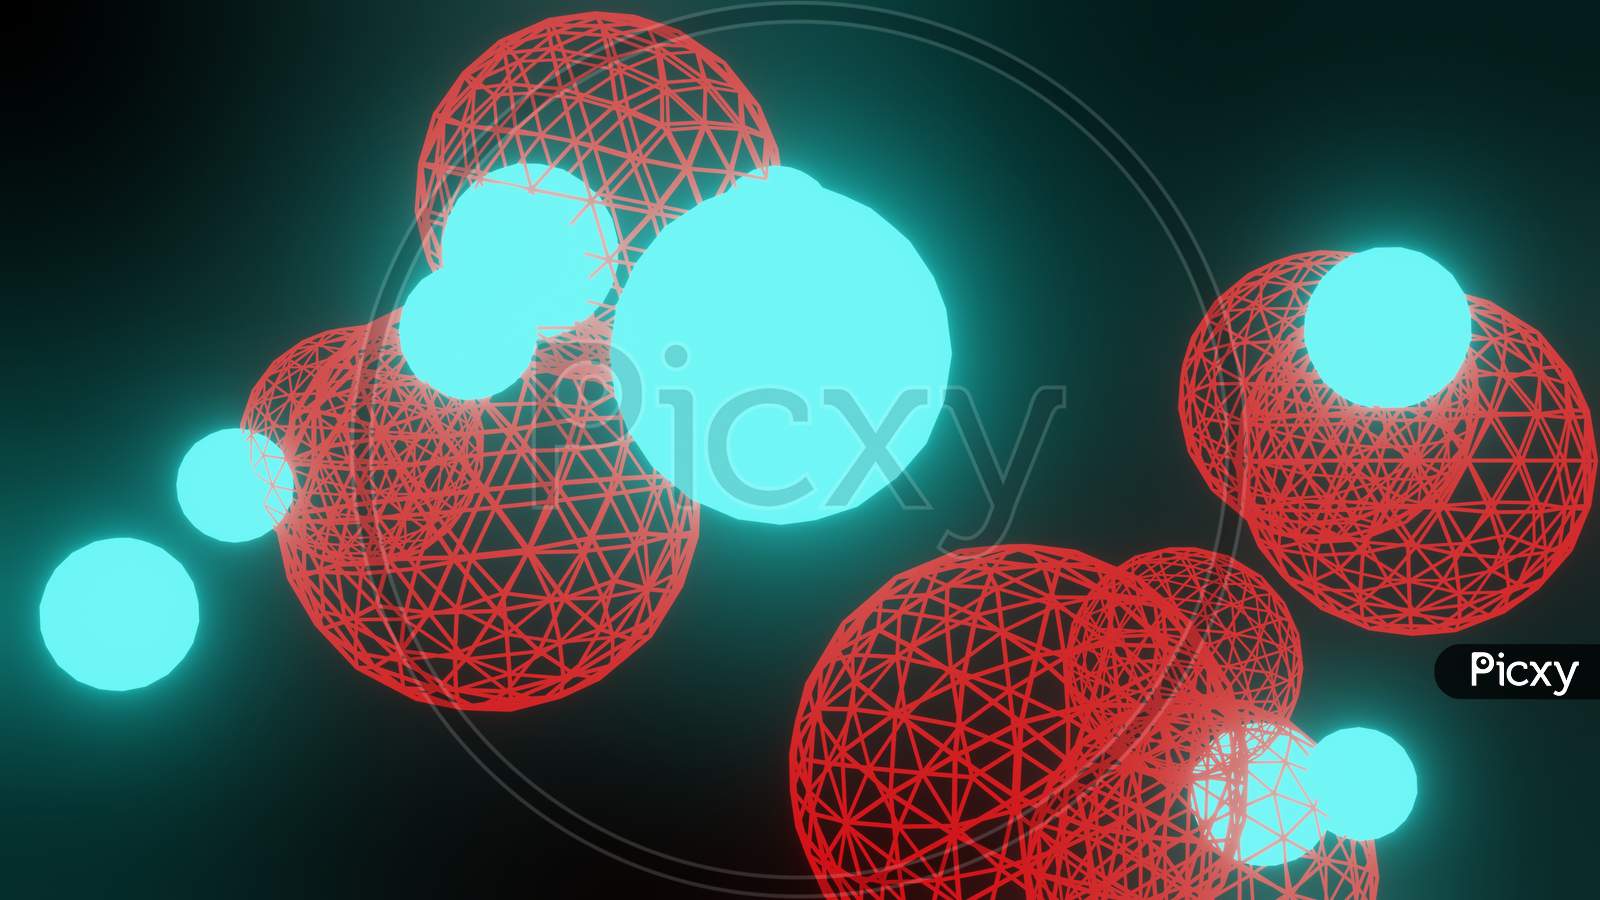 Illustration Graphic Of 3D Abstract Wired Frame And Plasma Or Energy, Sphere Or Circle, Animated On The Black Background. Blue Color Energy Ball And Red Wireframe Object Floating On The Frame.